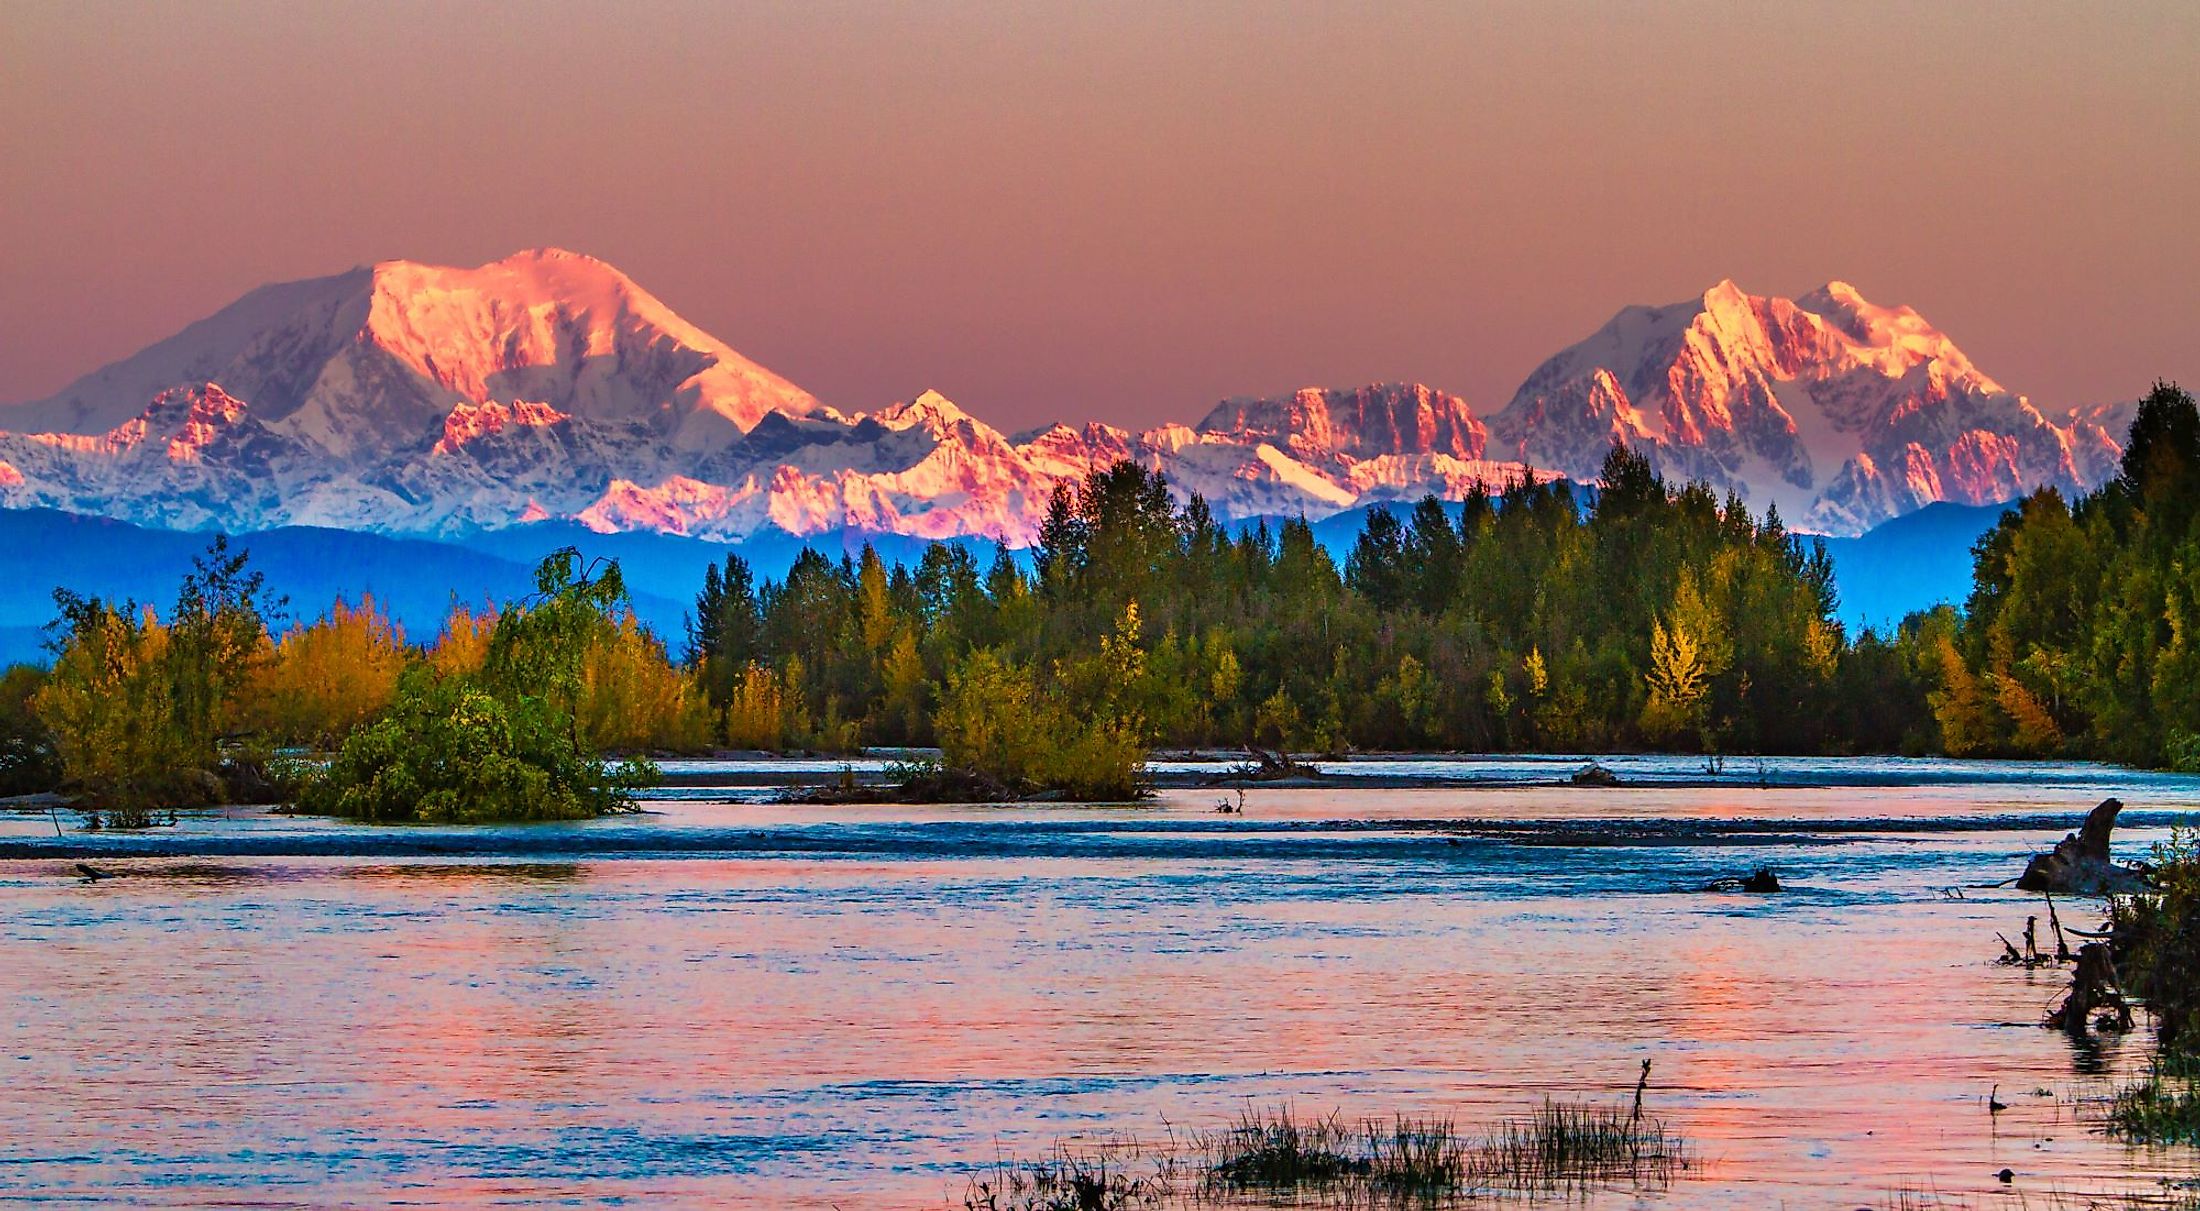 Sunrise on Mount Foraker and Mount Hunter across the Susitna River with fall foliage. 